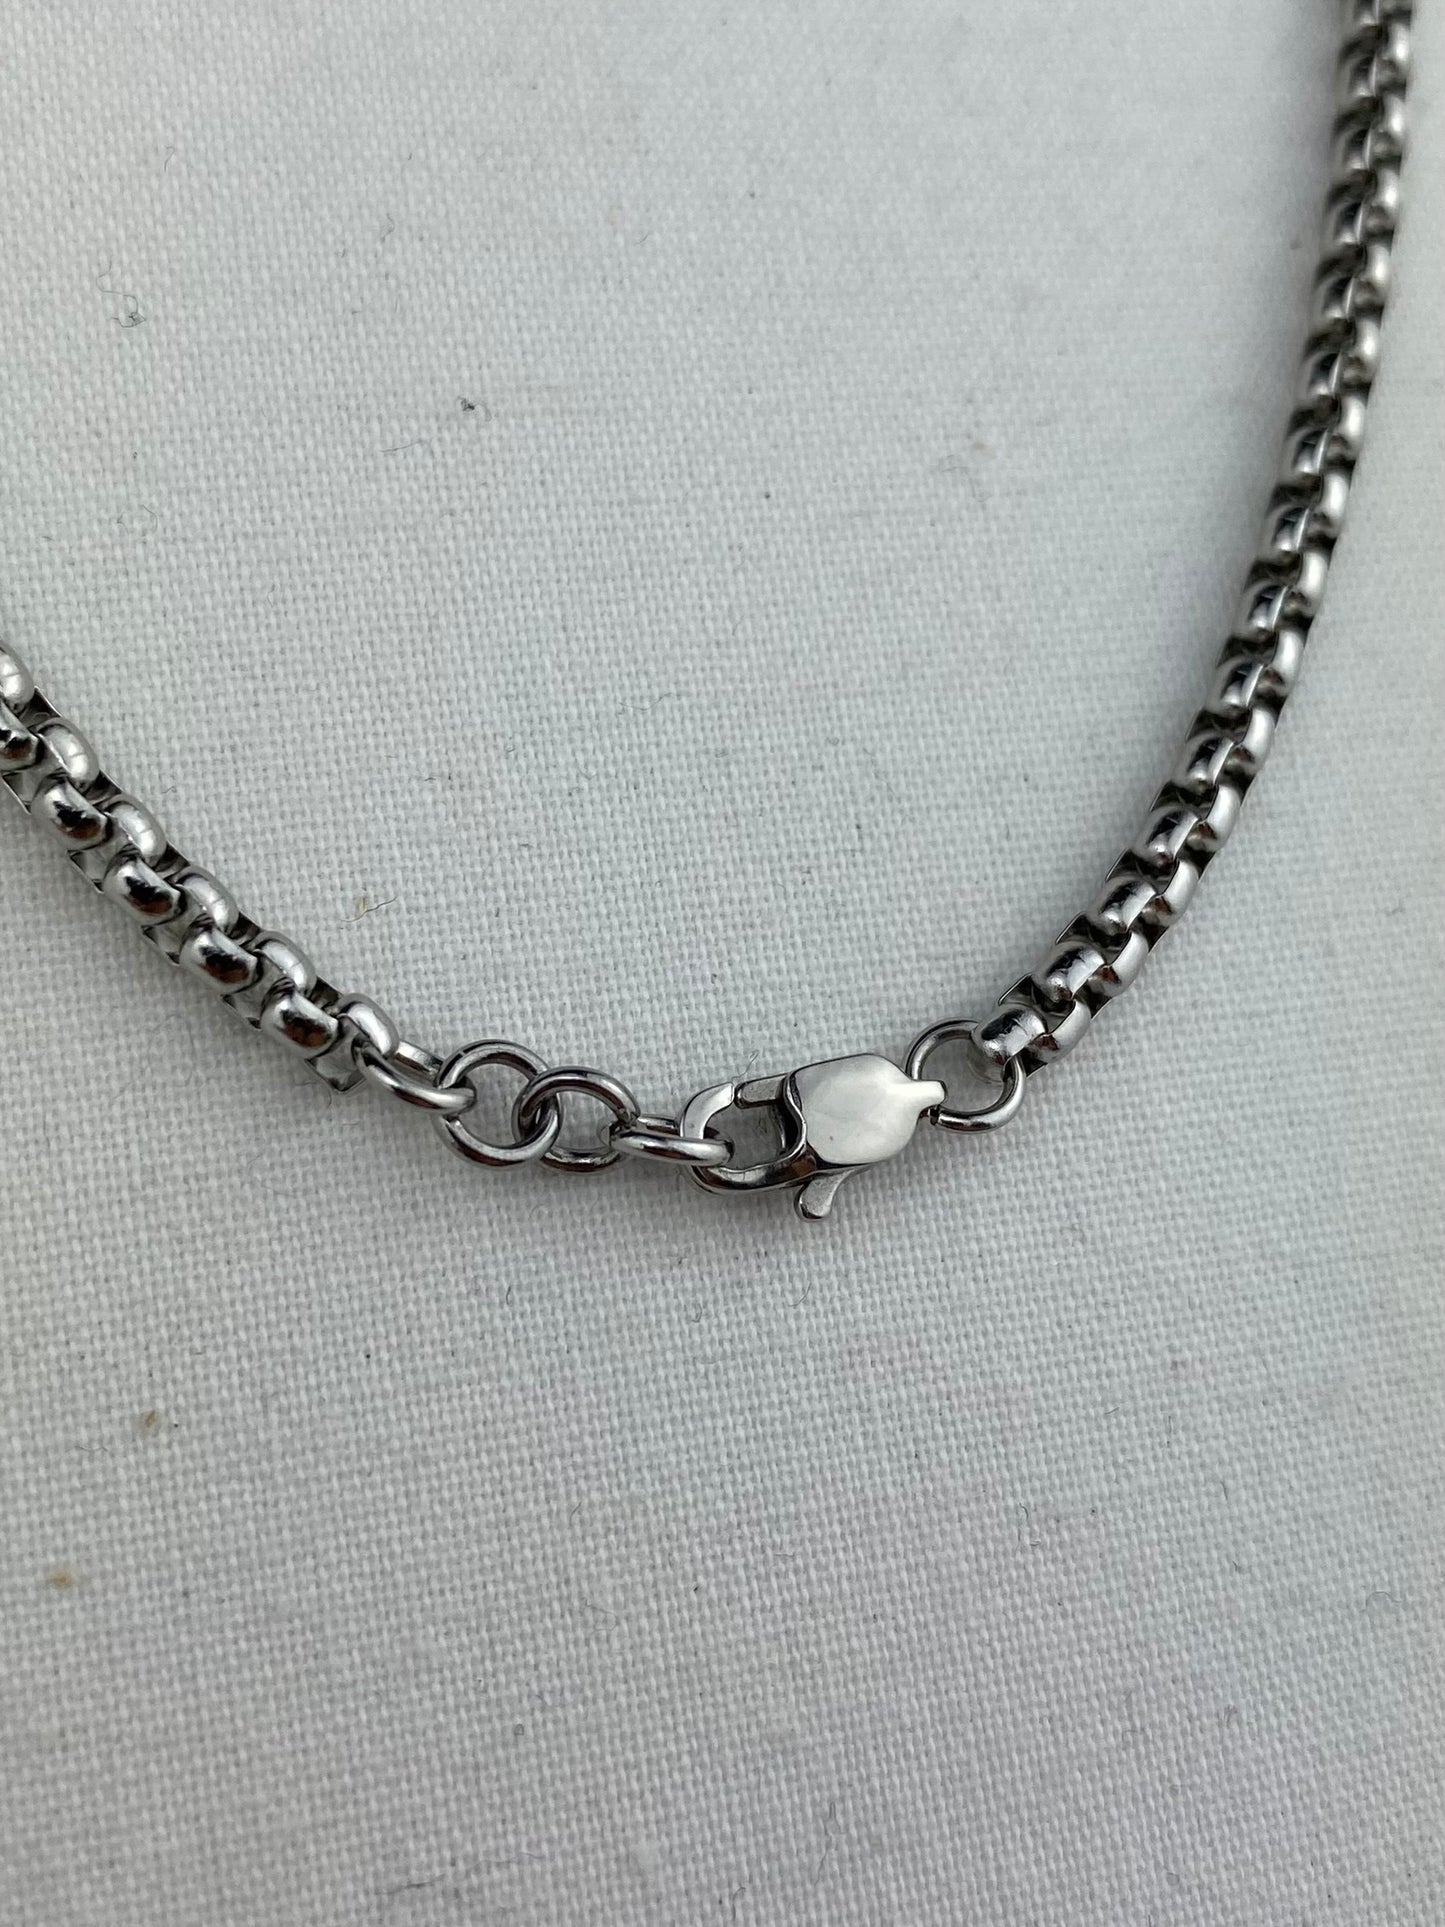 Burly Box Necklace - Stainless Steel